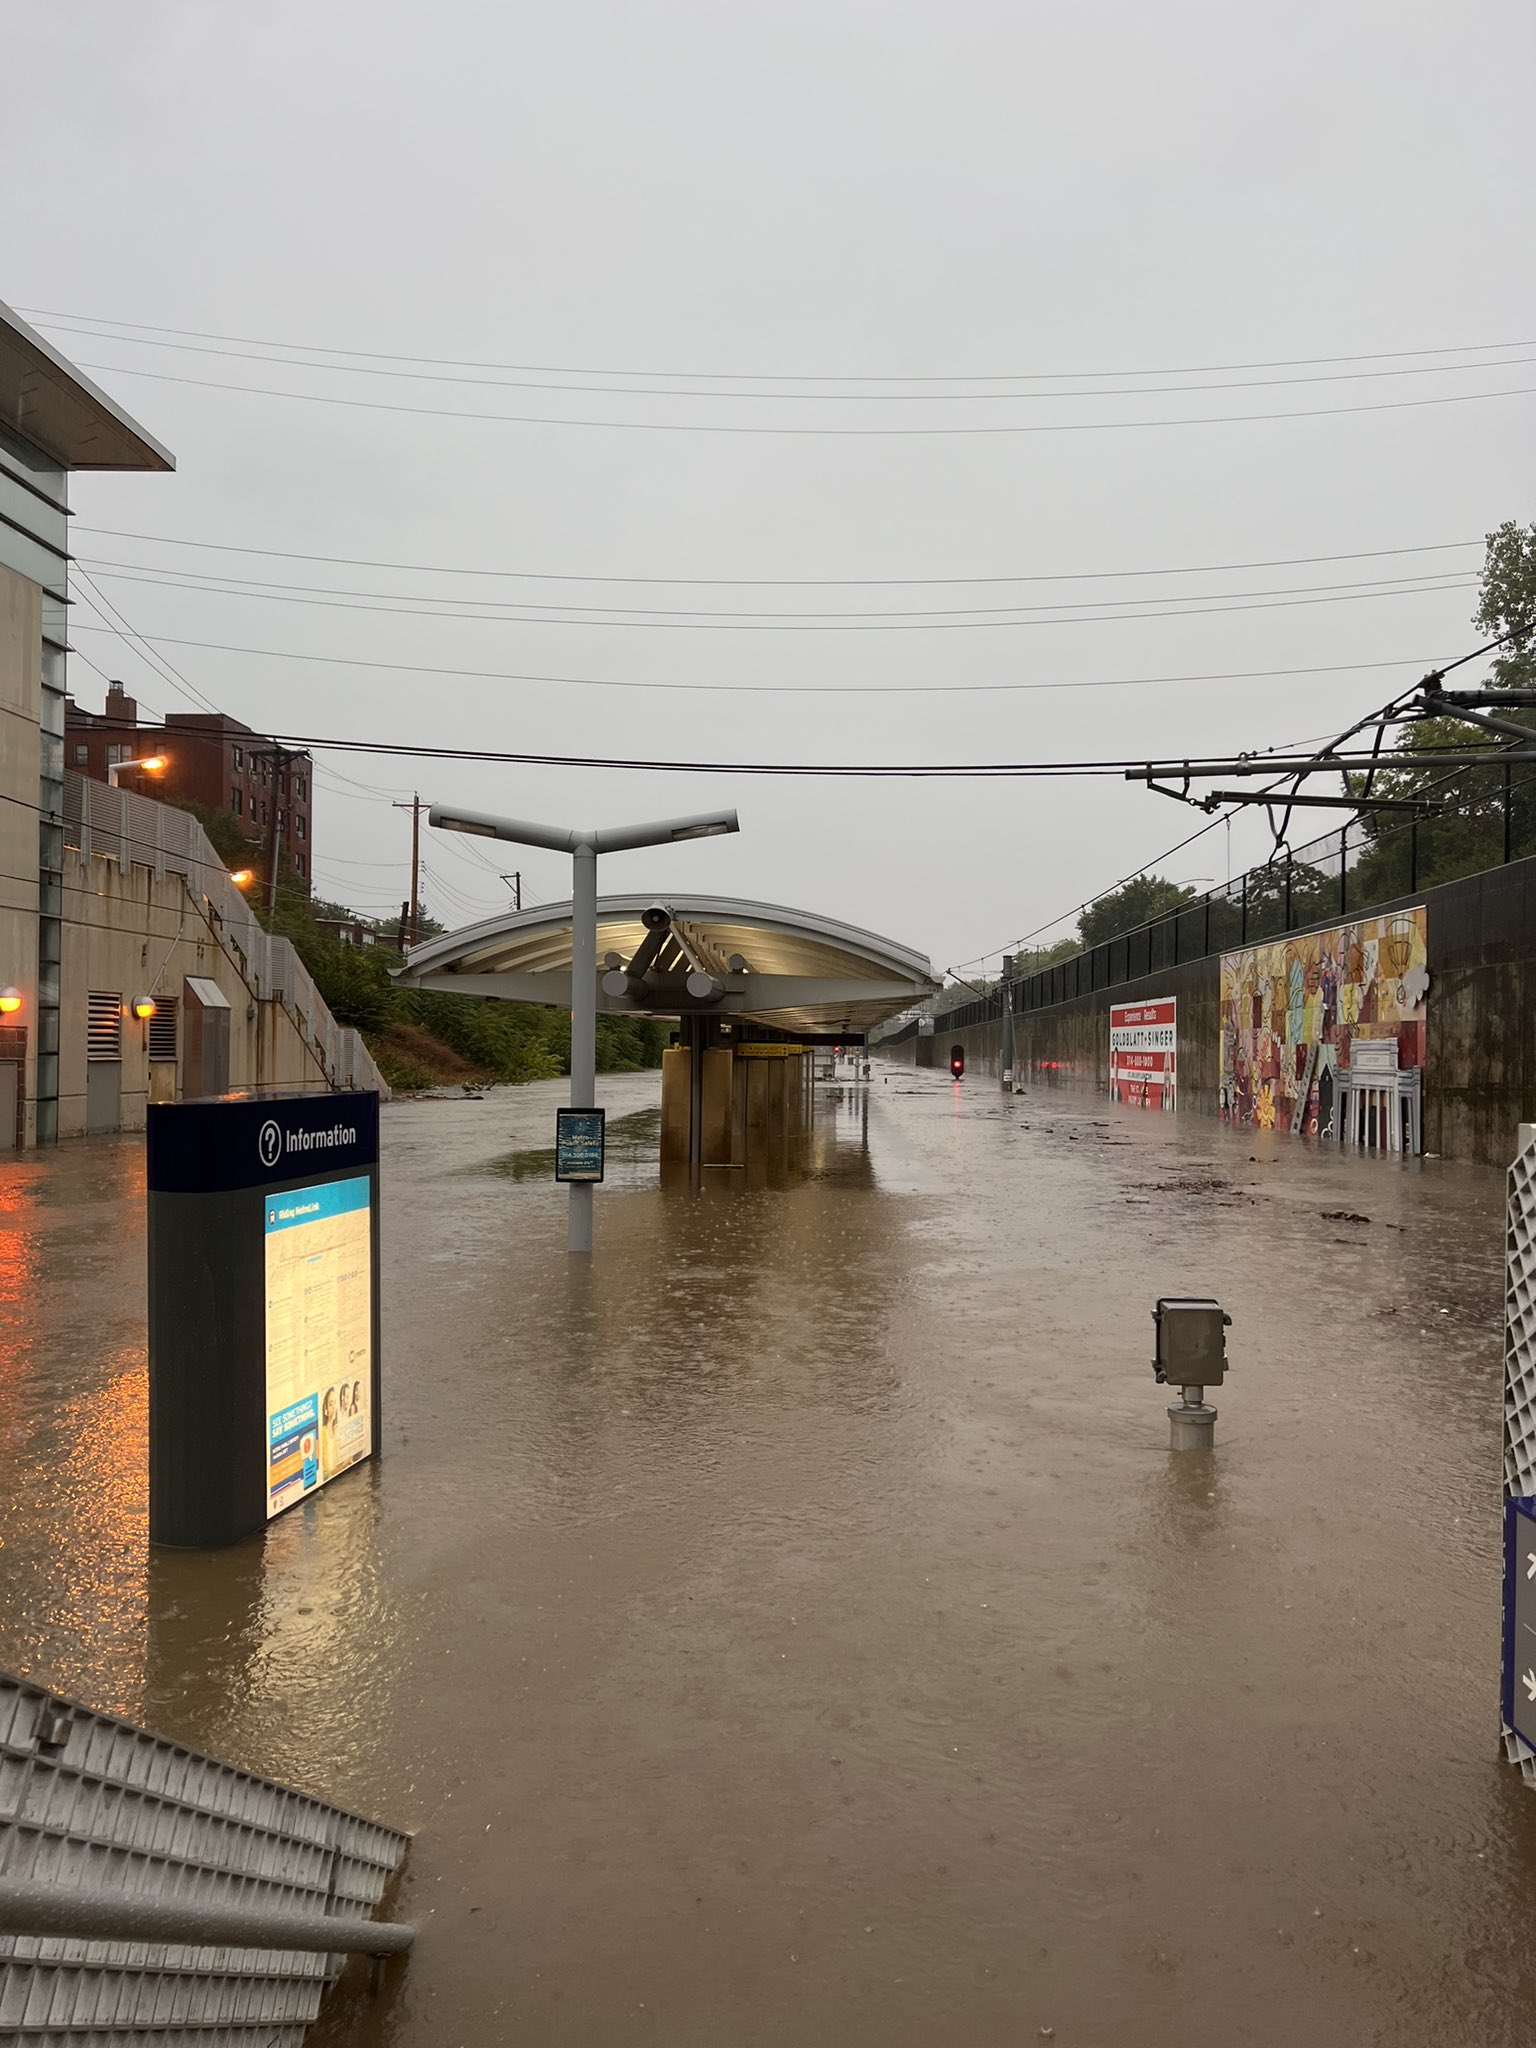 Flooding at the Forest Park - DeBaliviere MetroLink station in St. Louis, MO.